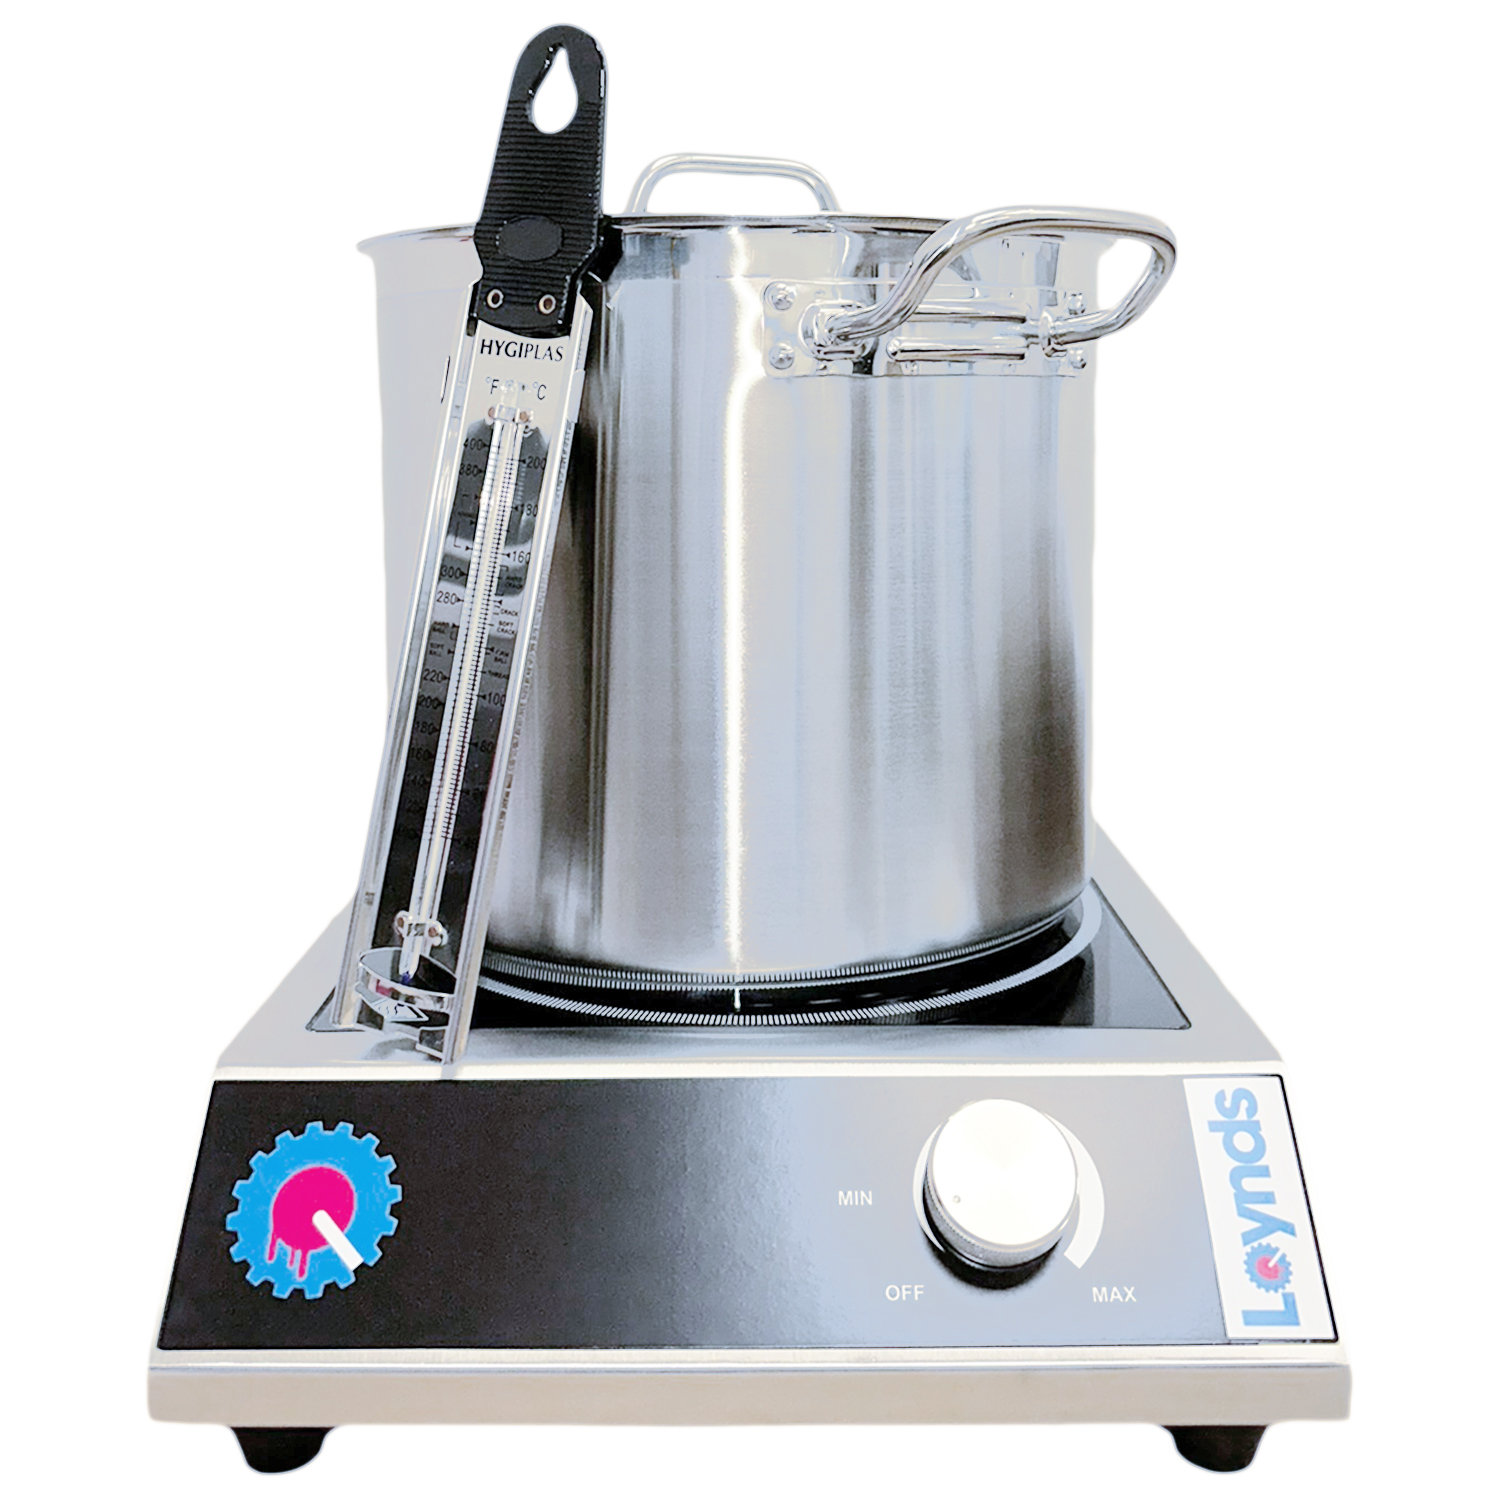 Low Volume Candy Cooking Stove, Pan & Thermometer - CB01 • Loynds